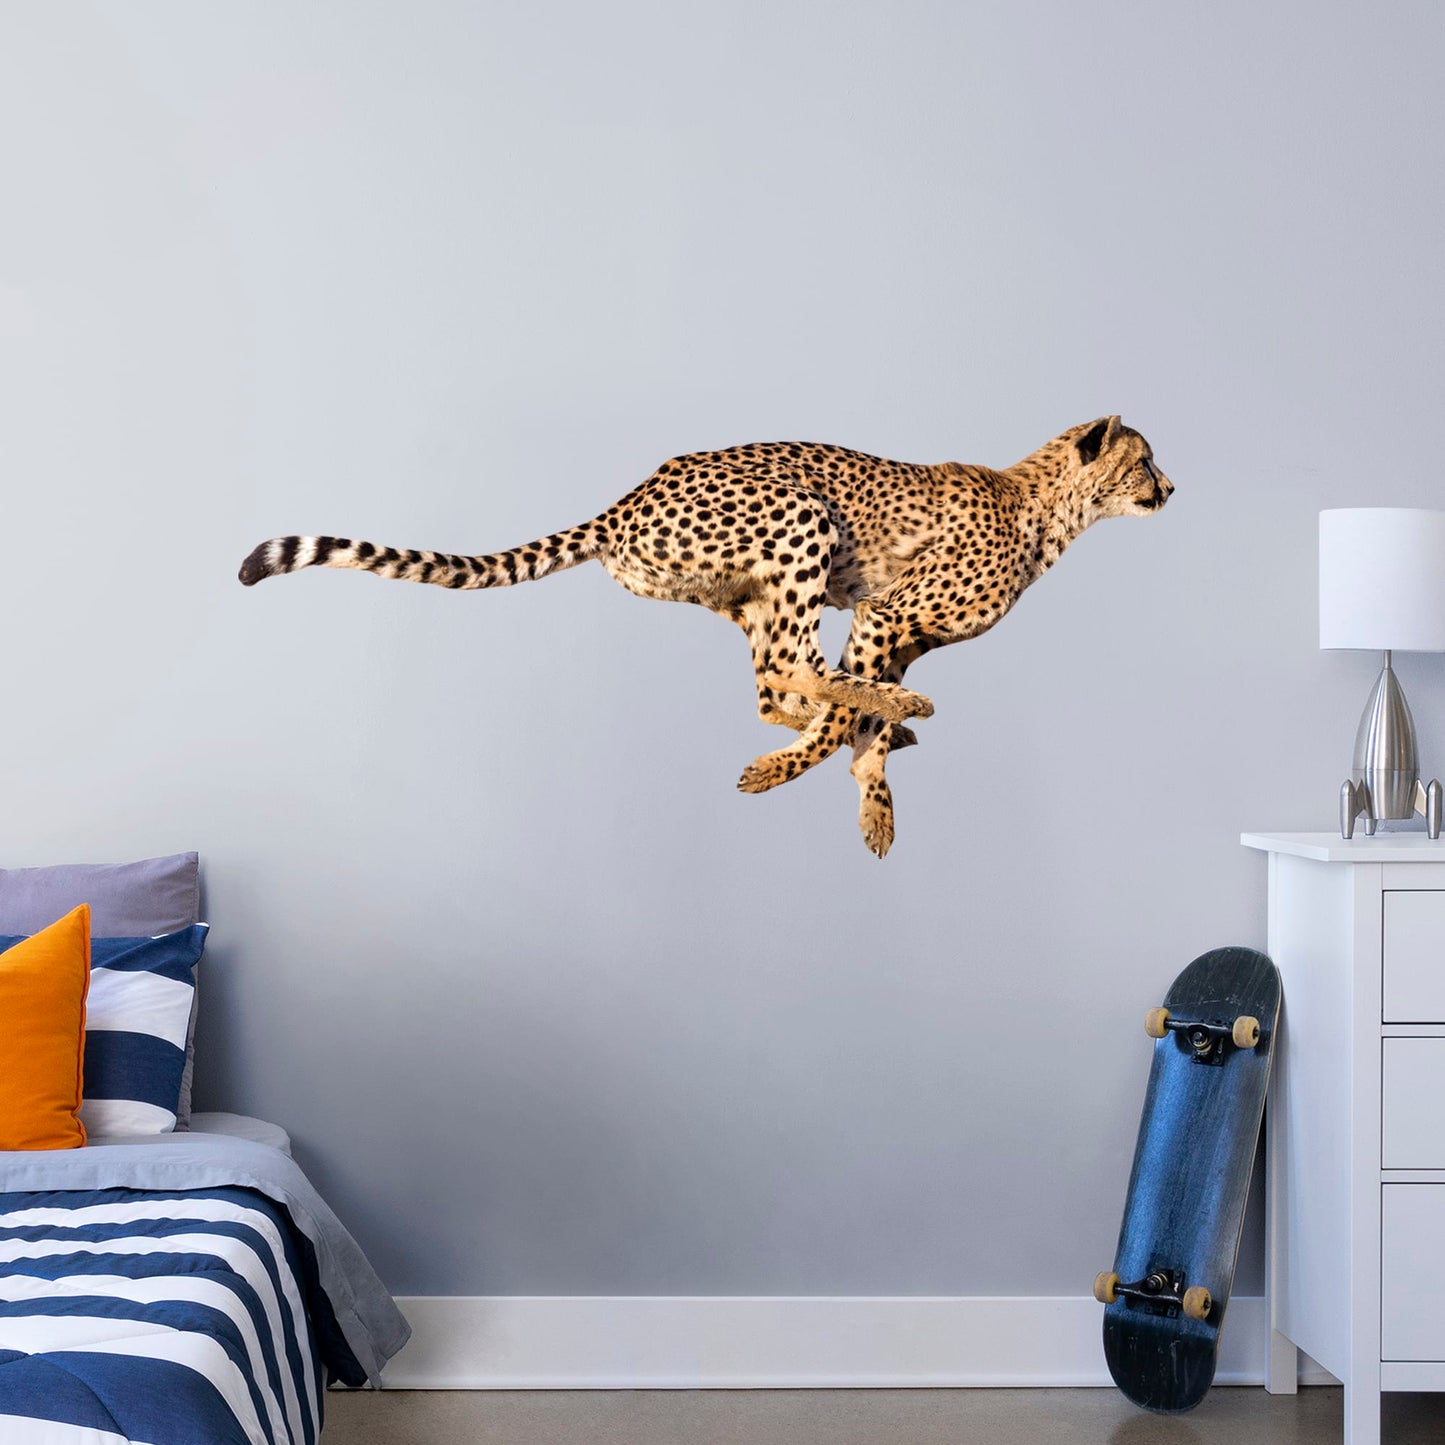 Giant Animal + 2 Decals (62"W x 29"H)